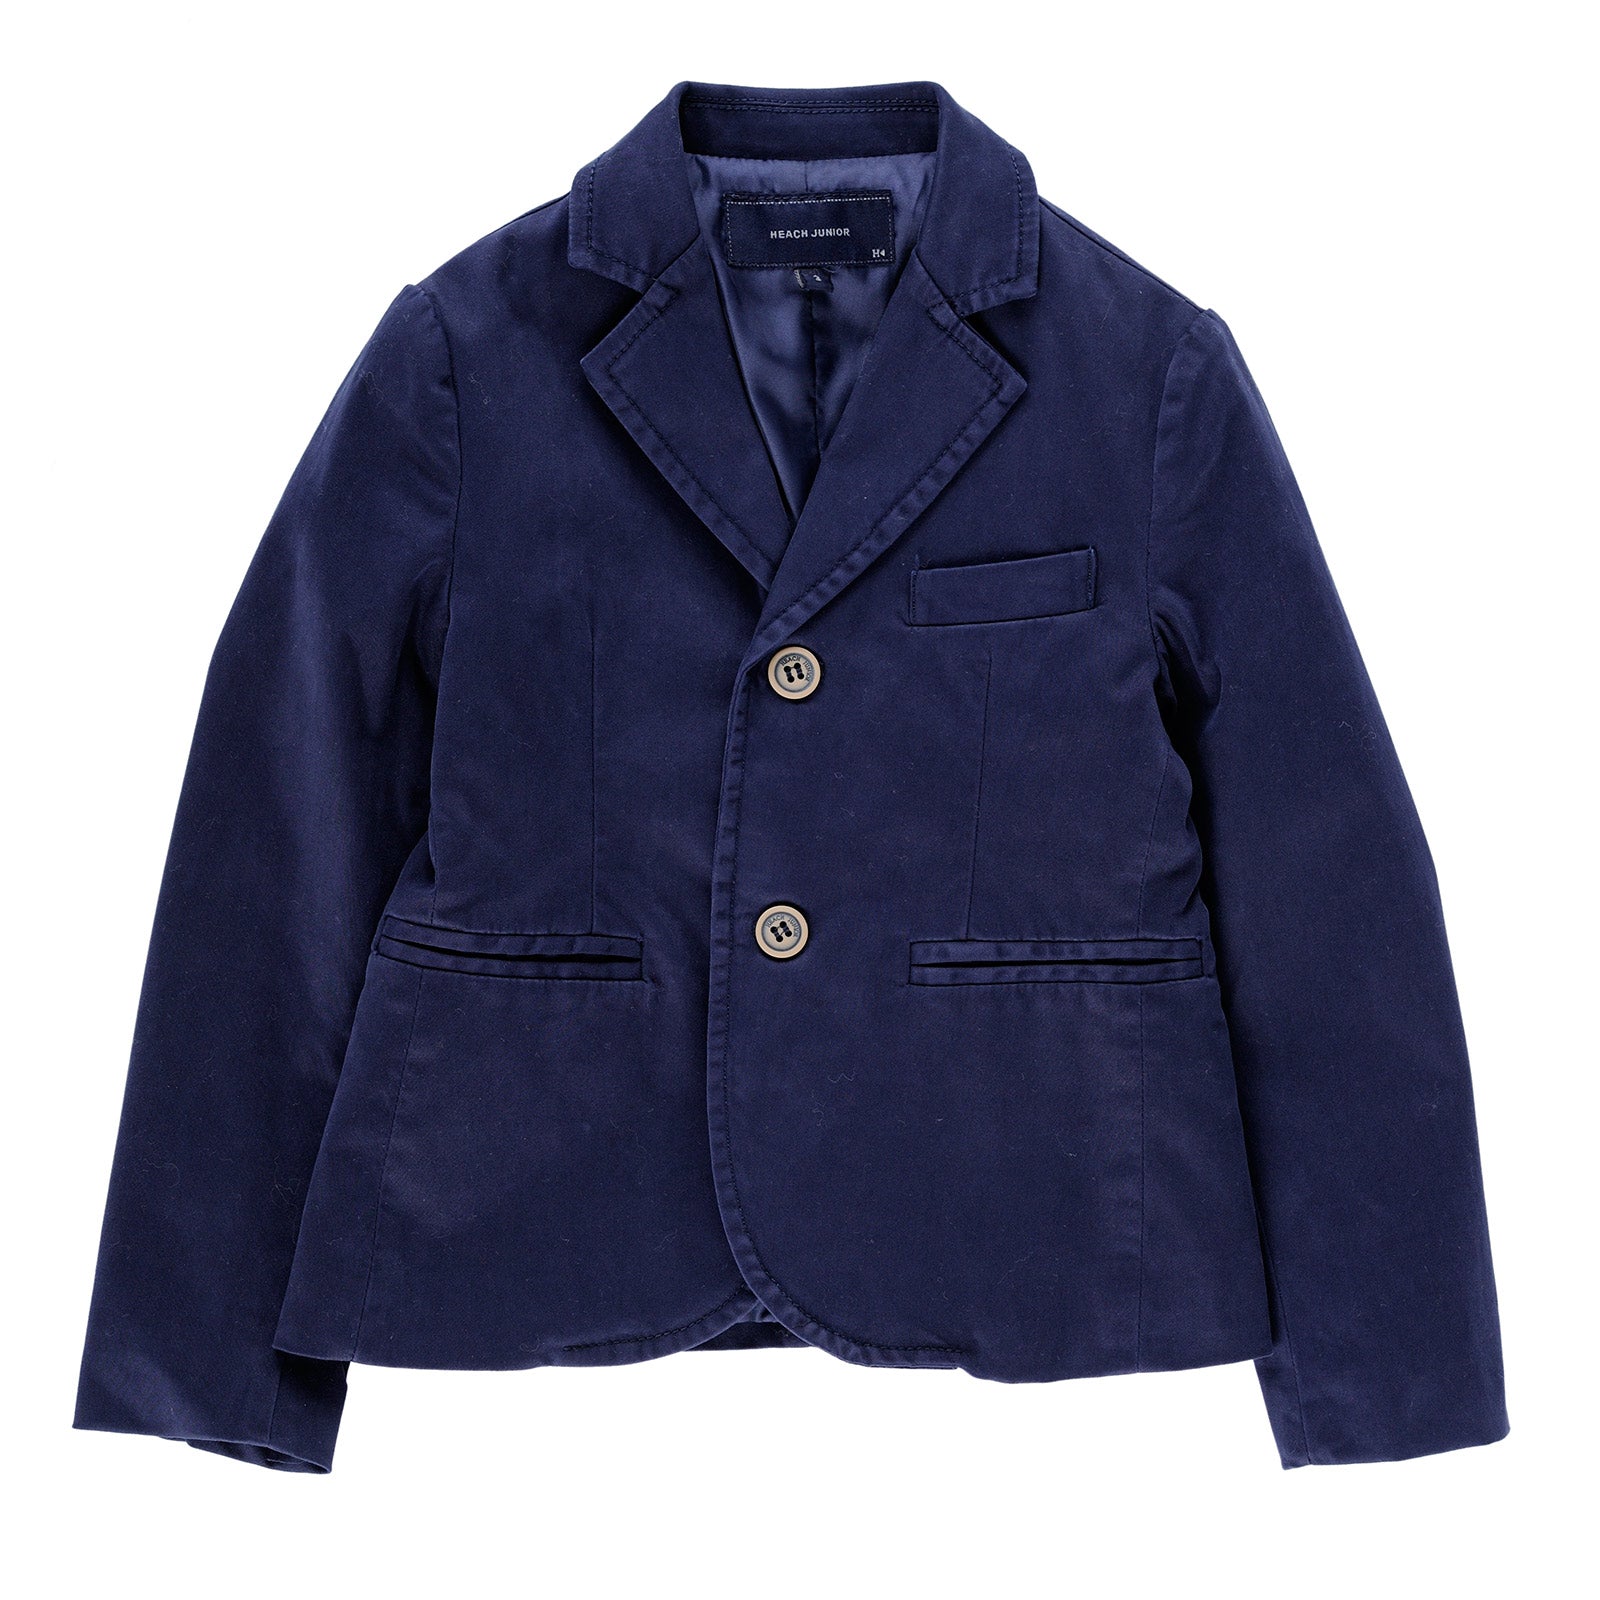 
  Jacket from the Silvian Heach Kids clothing line classic cut model
  two buttons with pockets ...